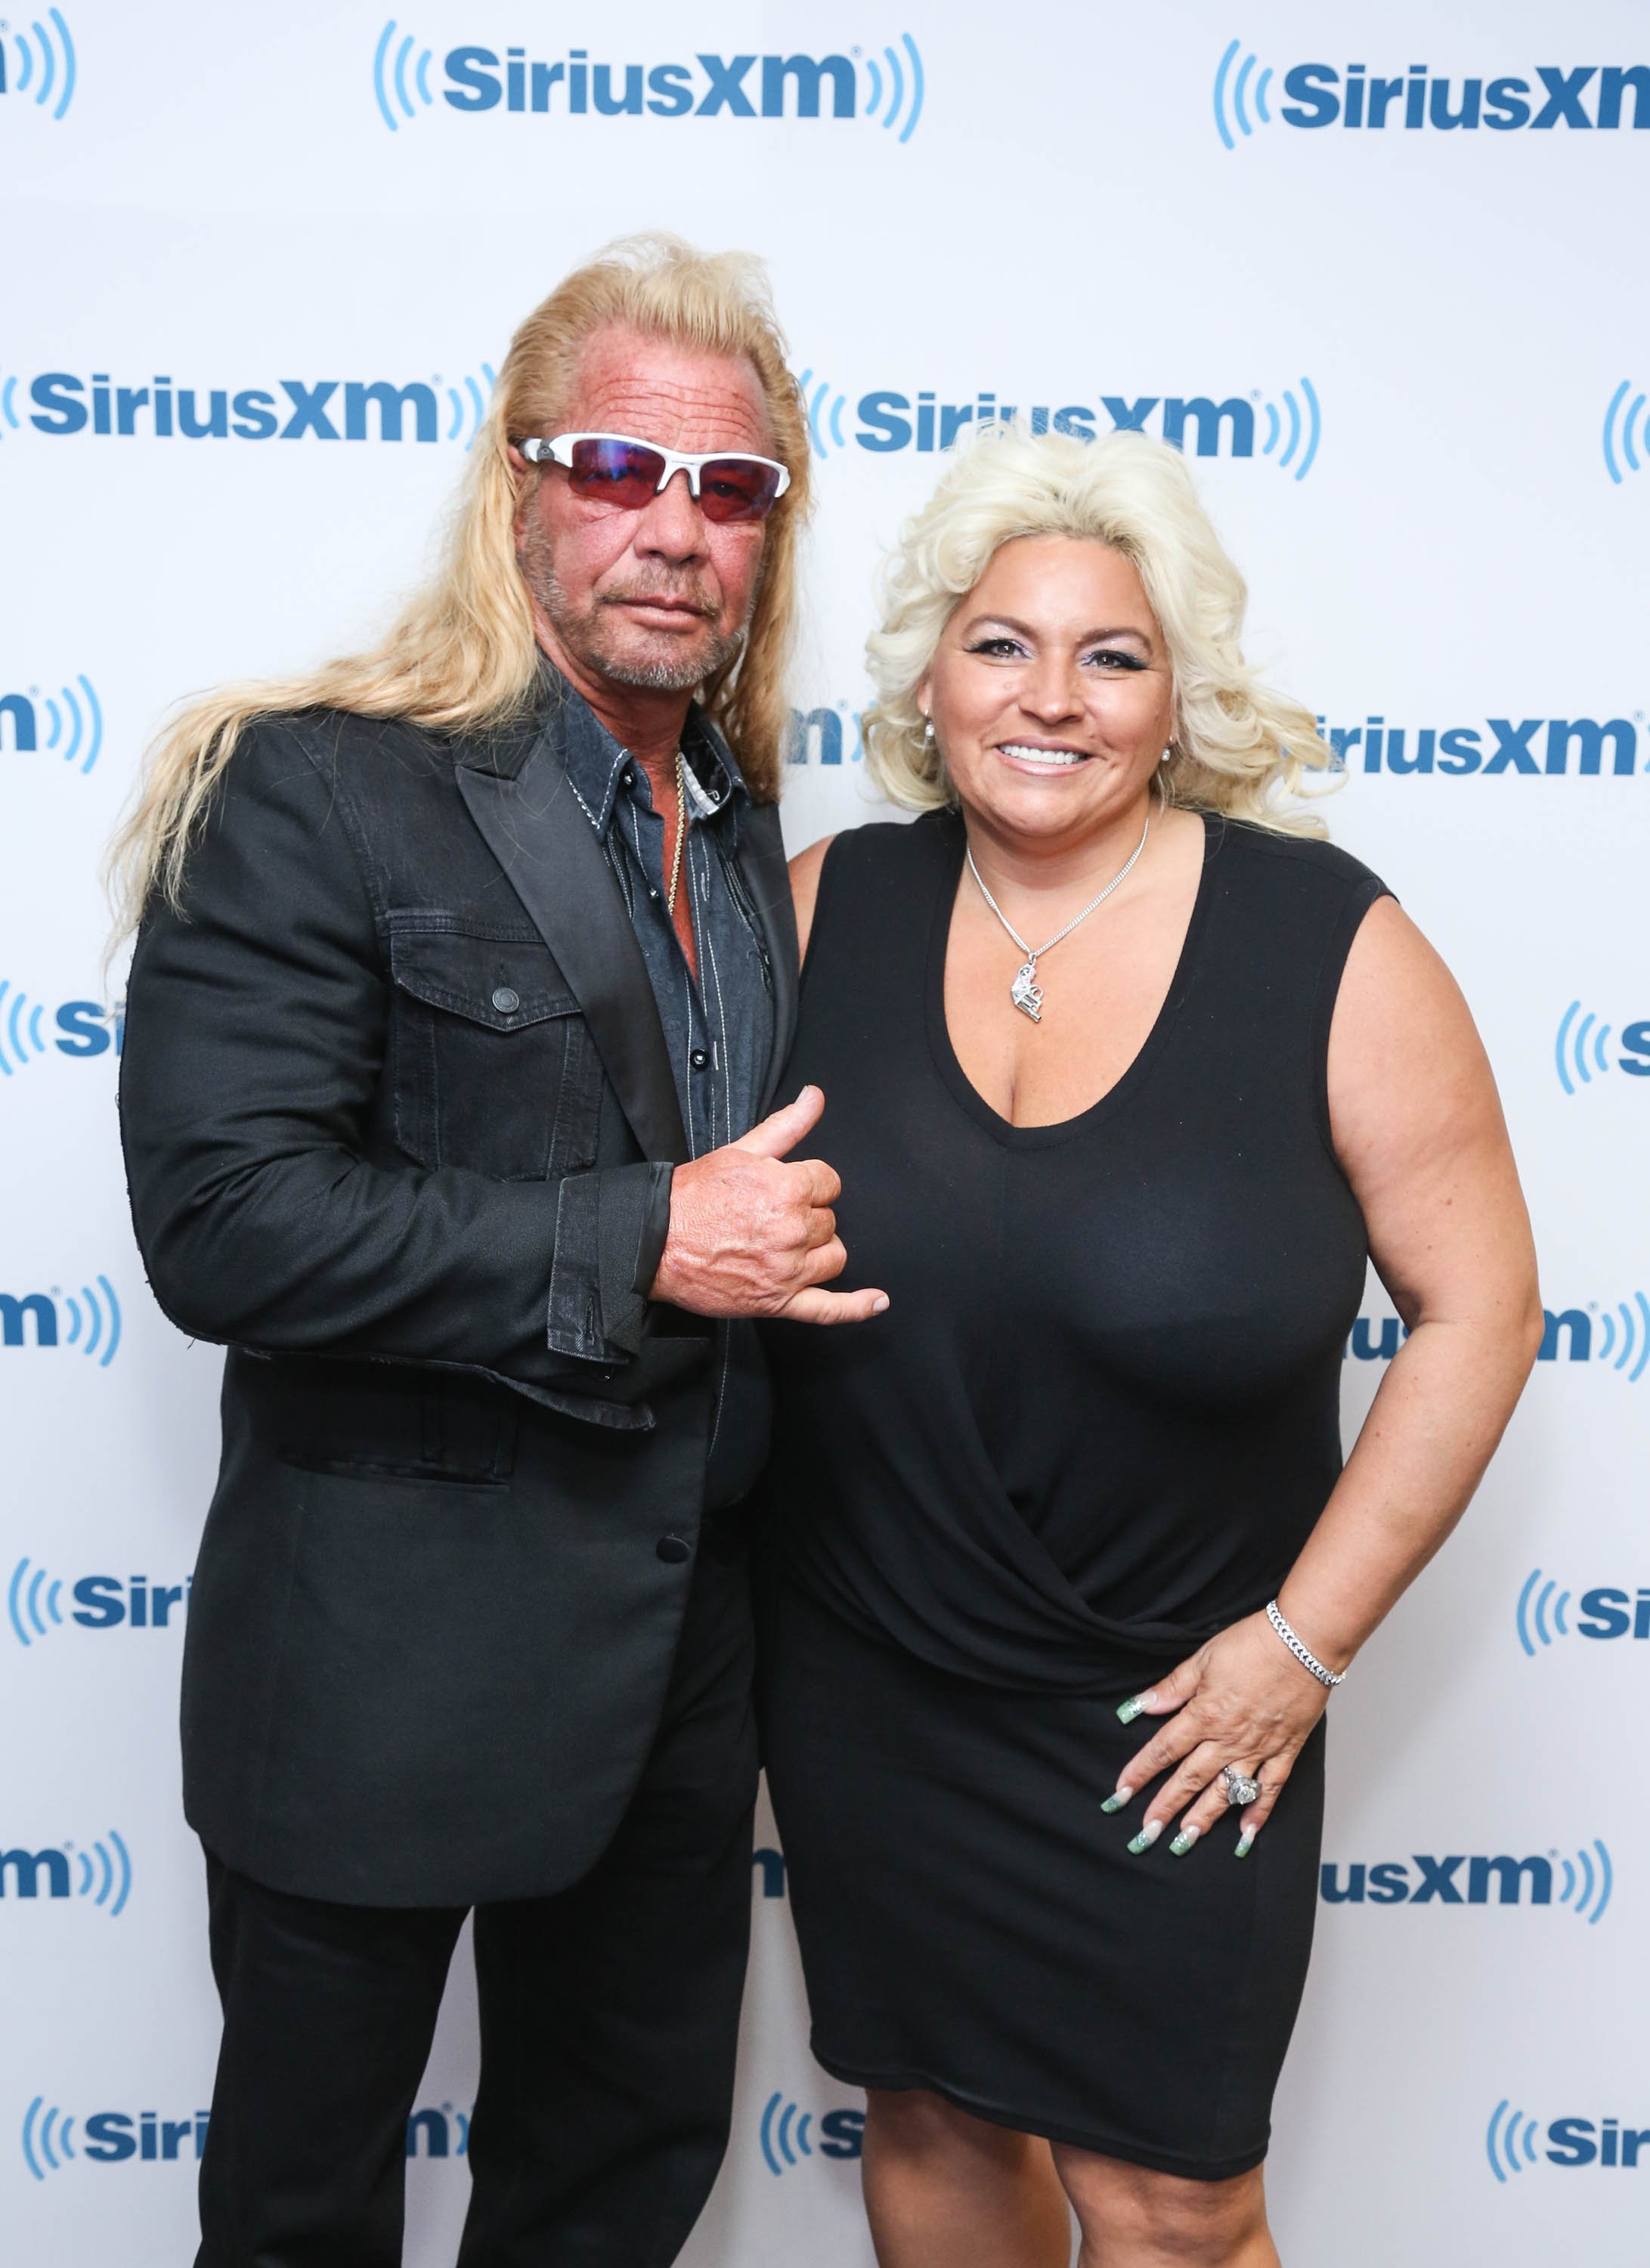 Dog the Bounty Hunter, Duane Chapman and wife Beth Chapman visit at SiriusXM Studios on June 9, 2014 in New York City. | Source: Getty Images